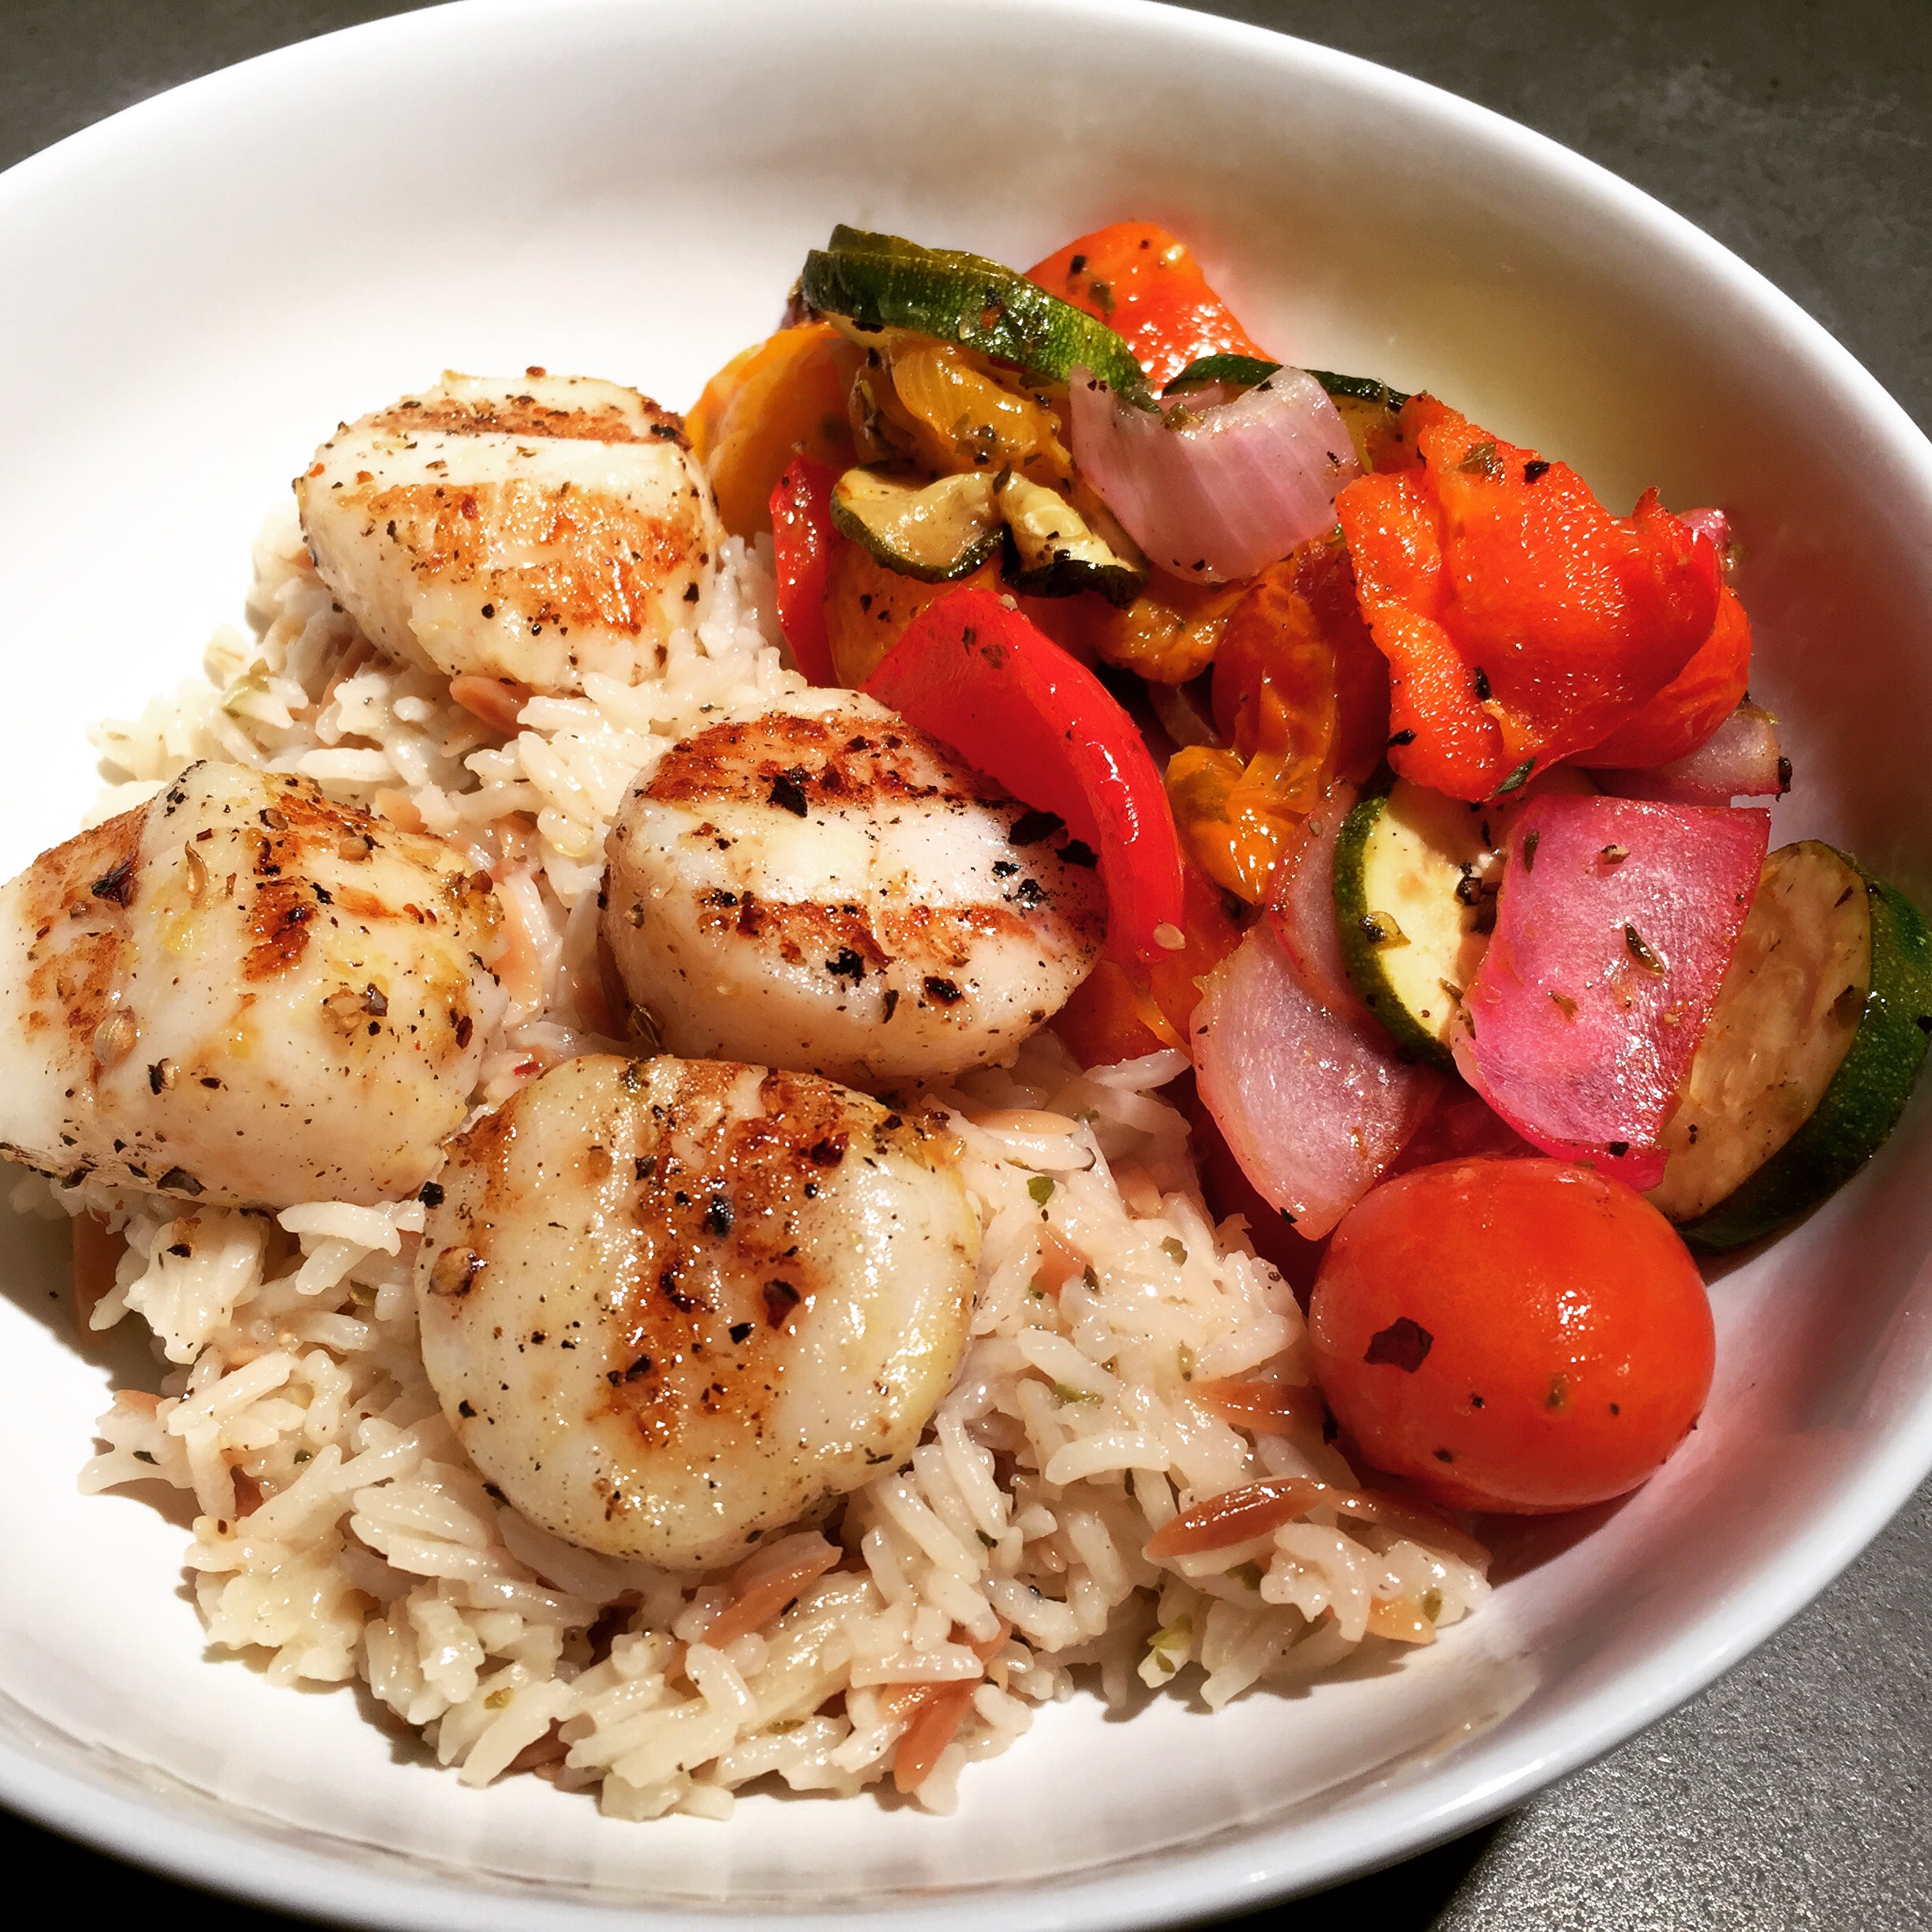 lemon everything kind of night: grilled scallops with grilled veggies and rice